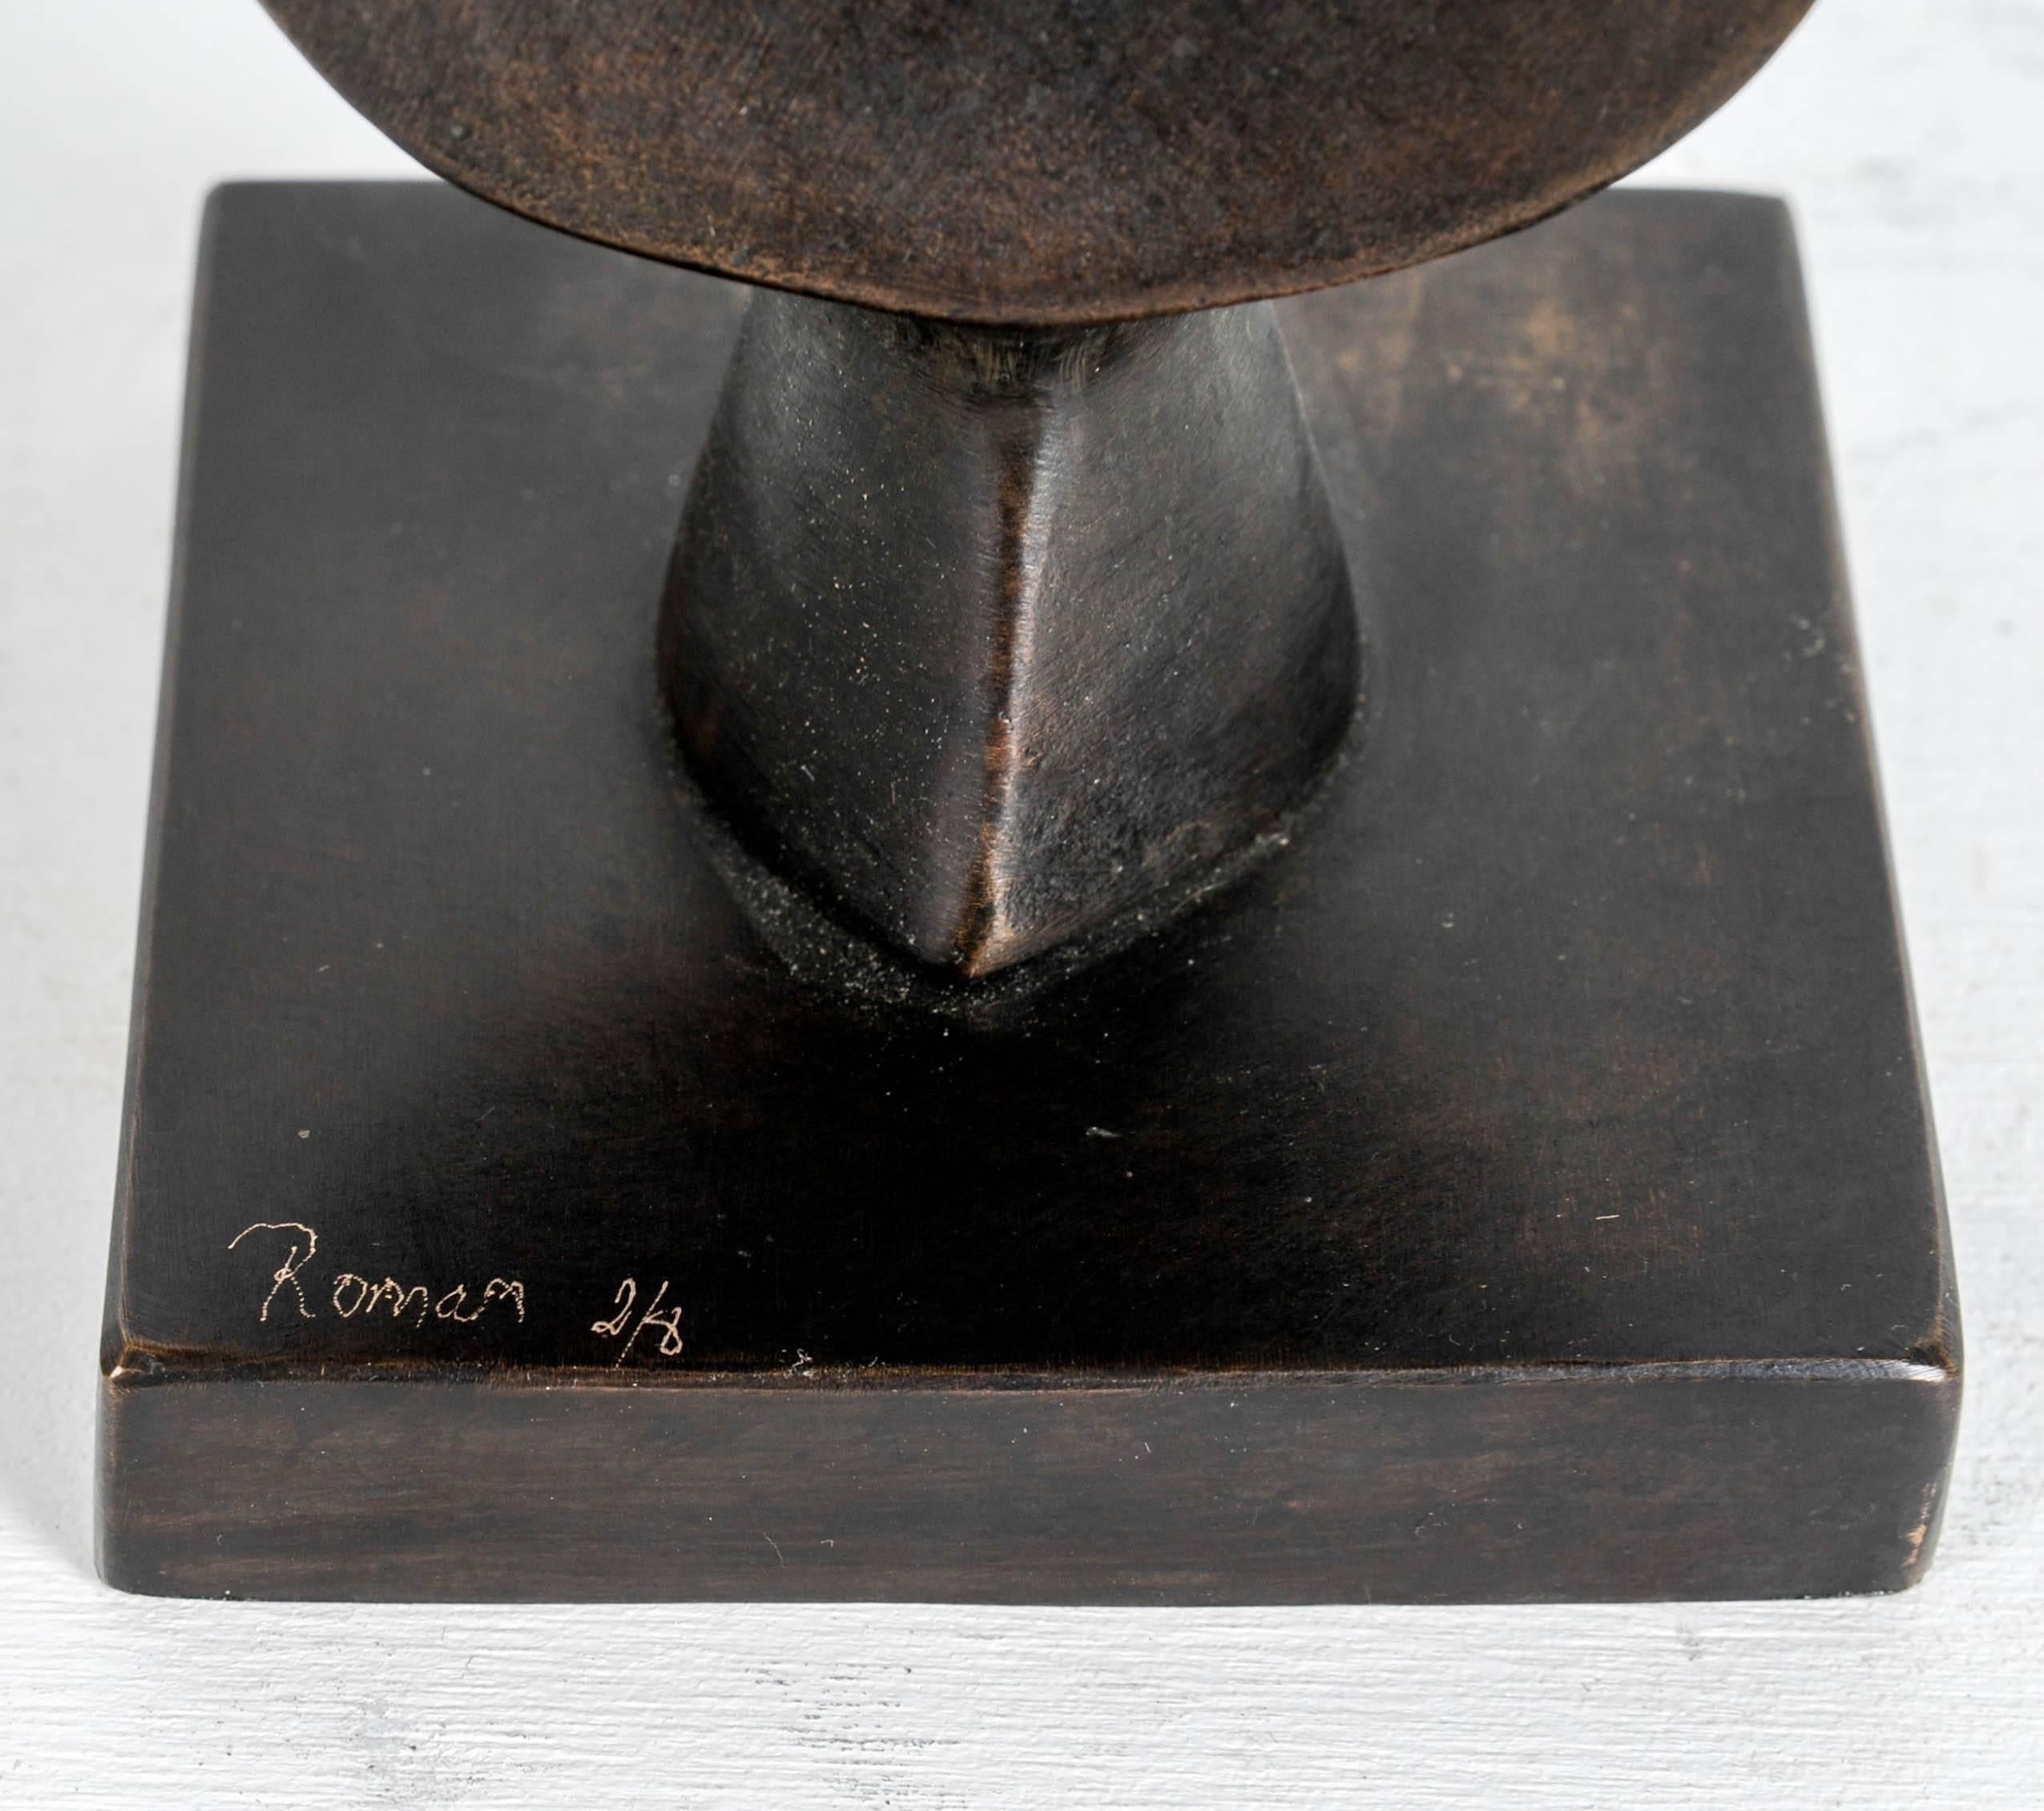 Bronze sculpture by Victor Roman. Signed and numbered 2/8.